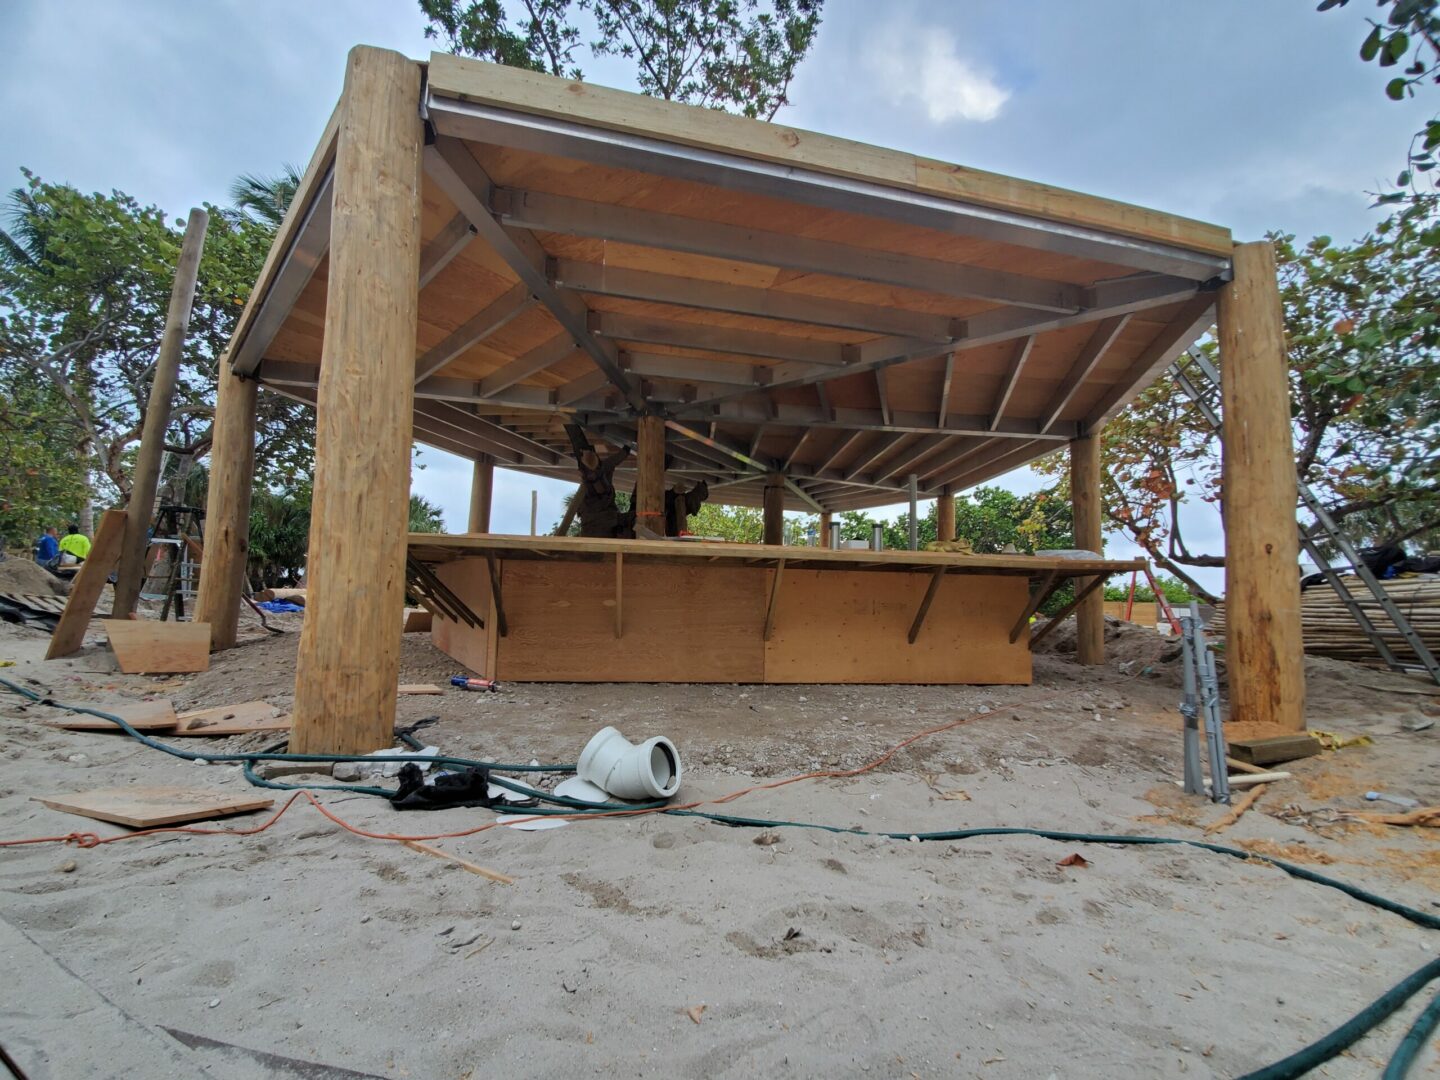 A wooden gazebo is being built on the beach.